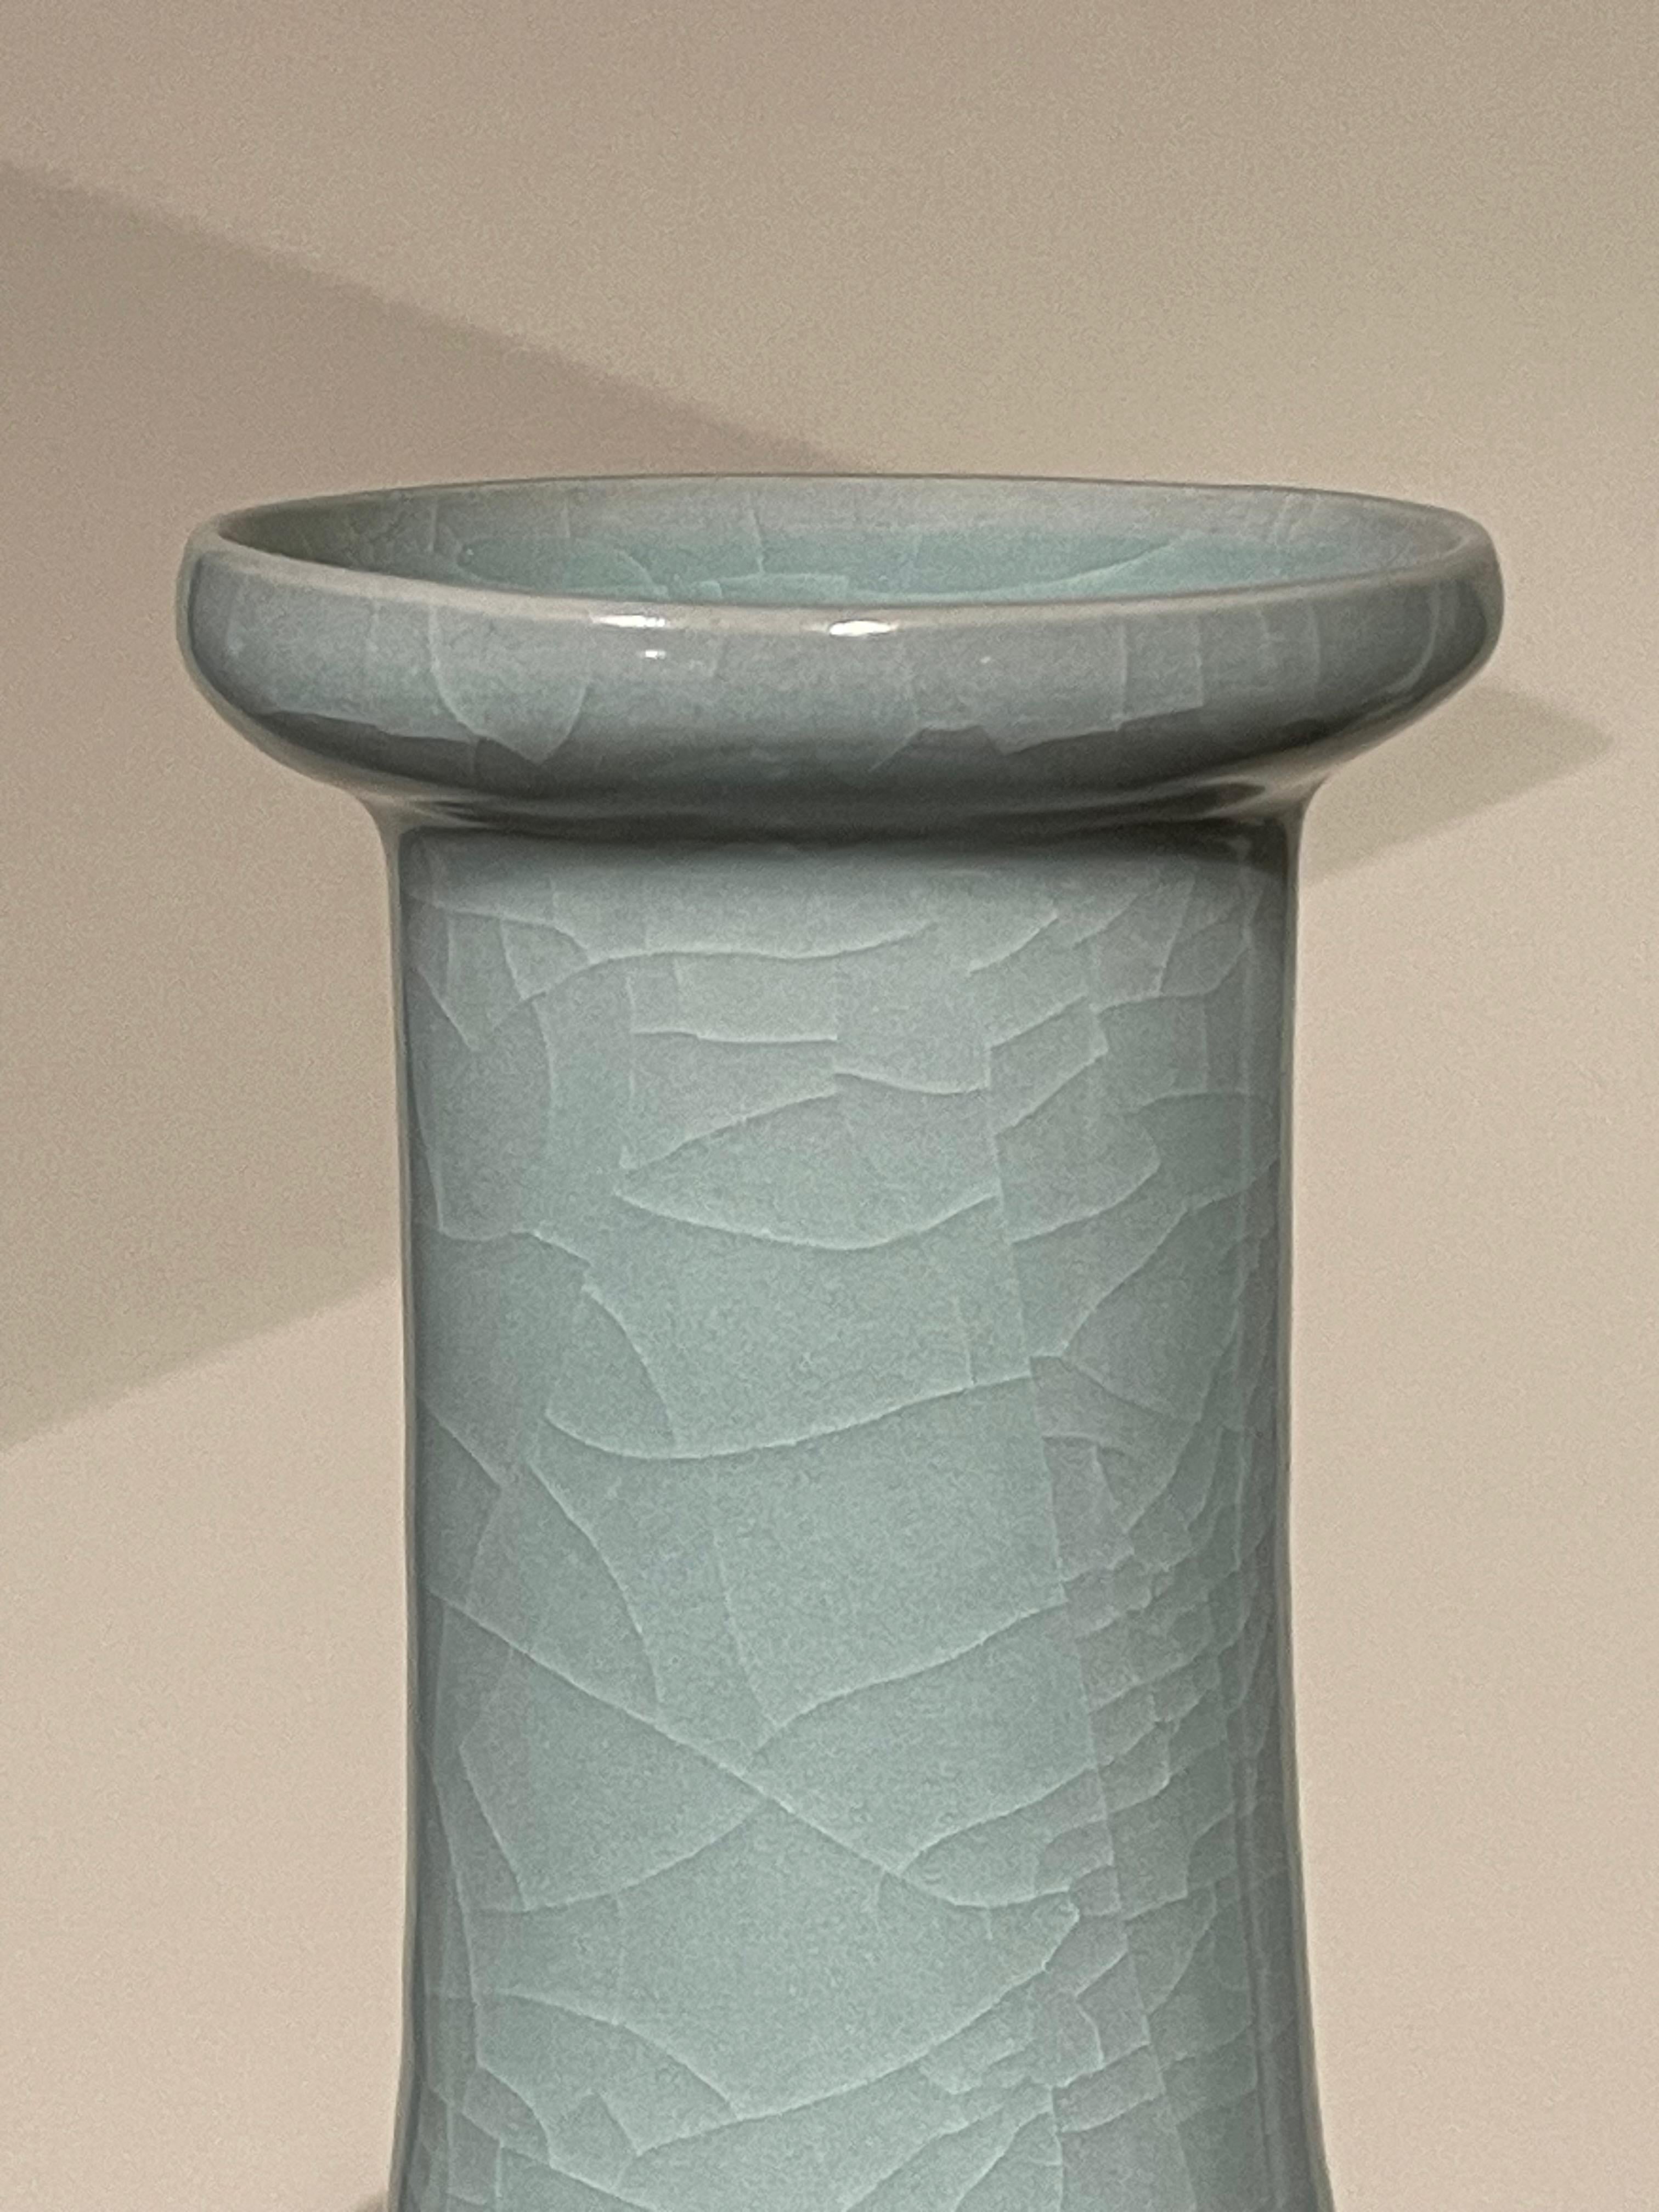 Contemporary Chinese pale turquoise vase.
Elongated neck with ribbed detail at opening.
Large collection available with varying sizes and shapes.
Sold individually.
ARRIVING APRIL